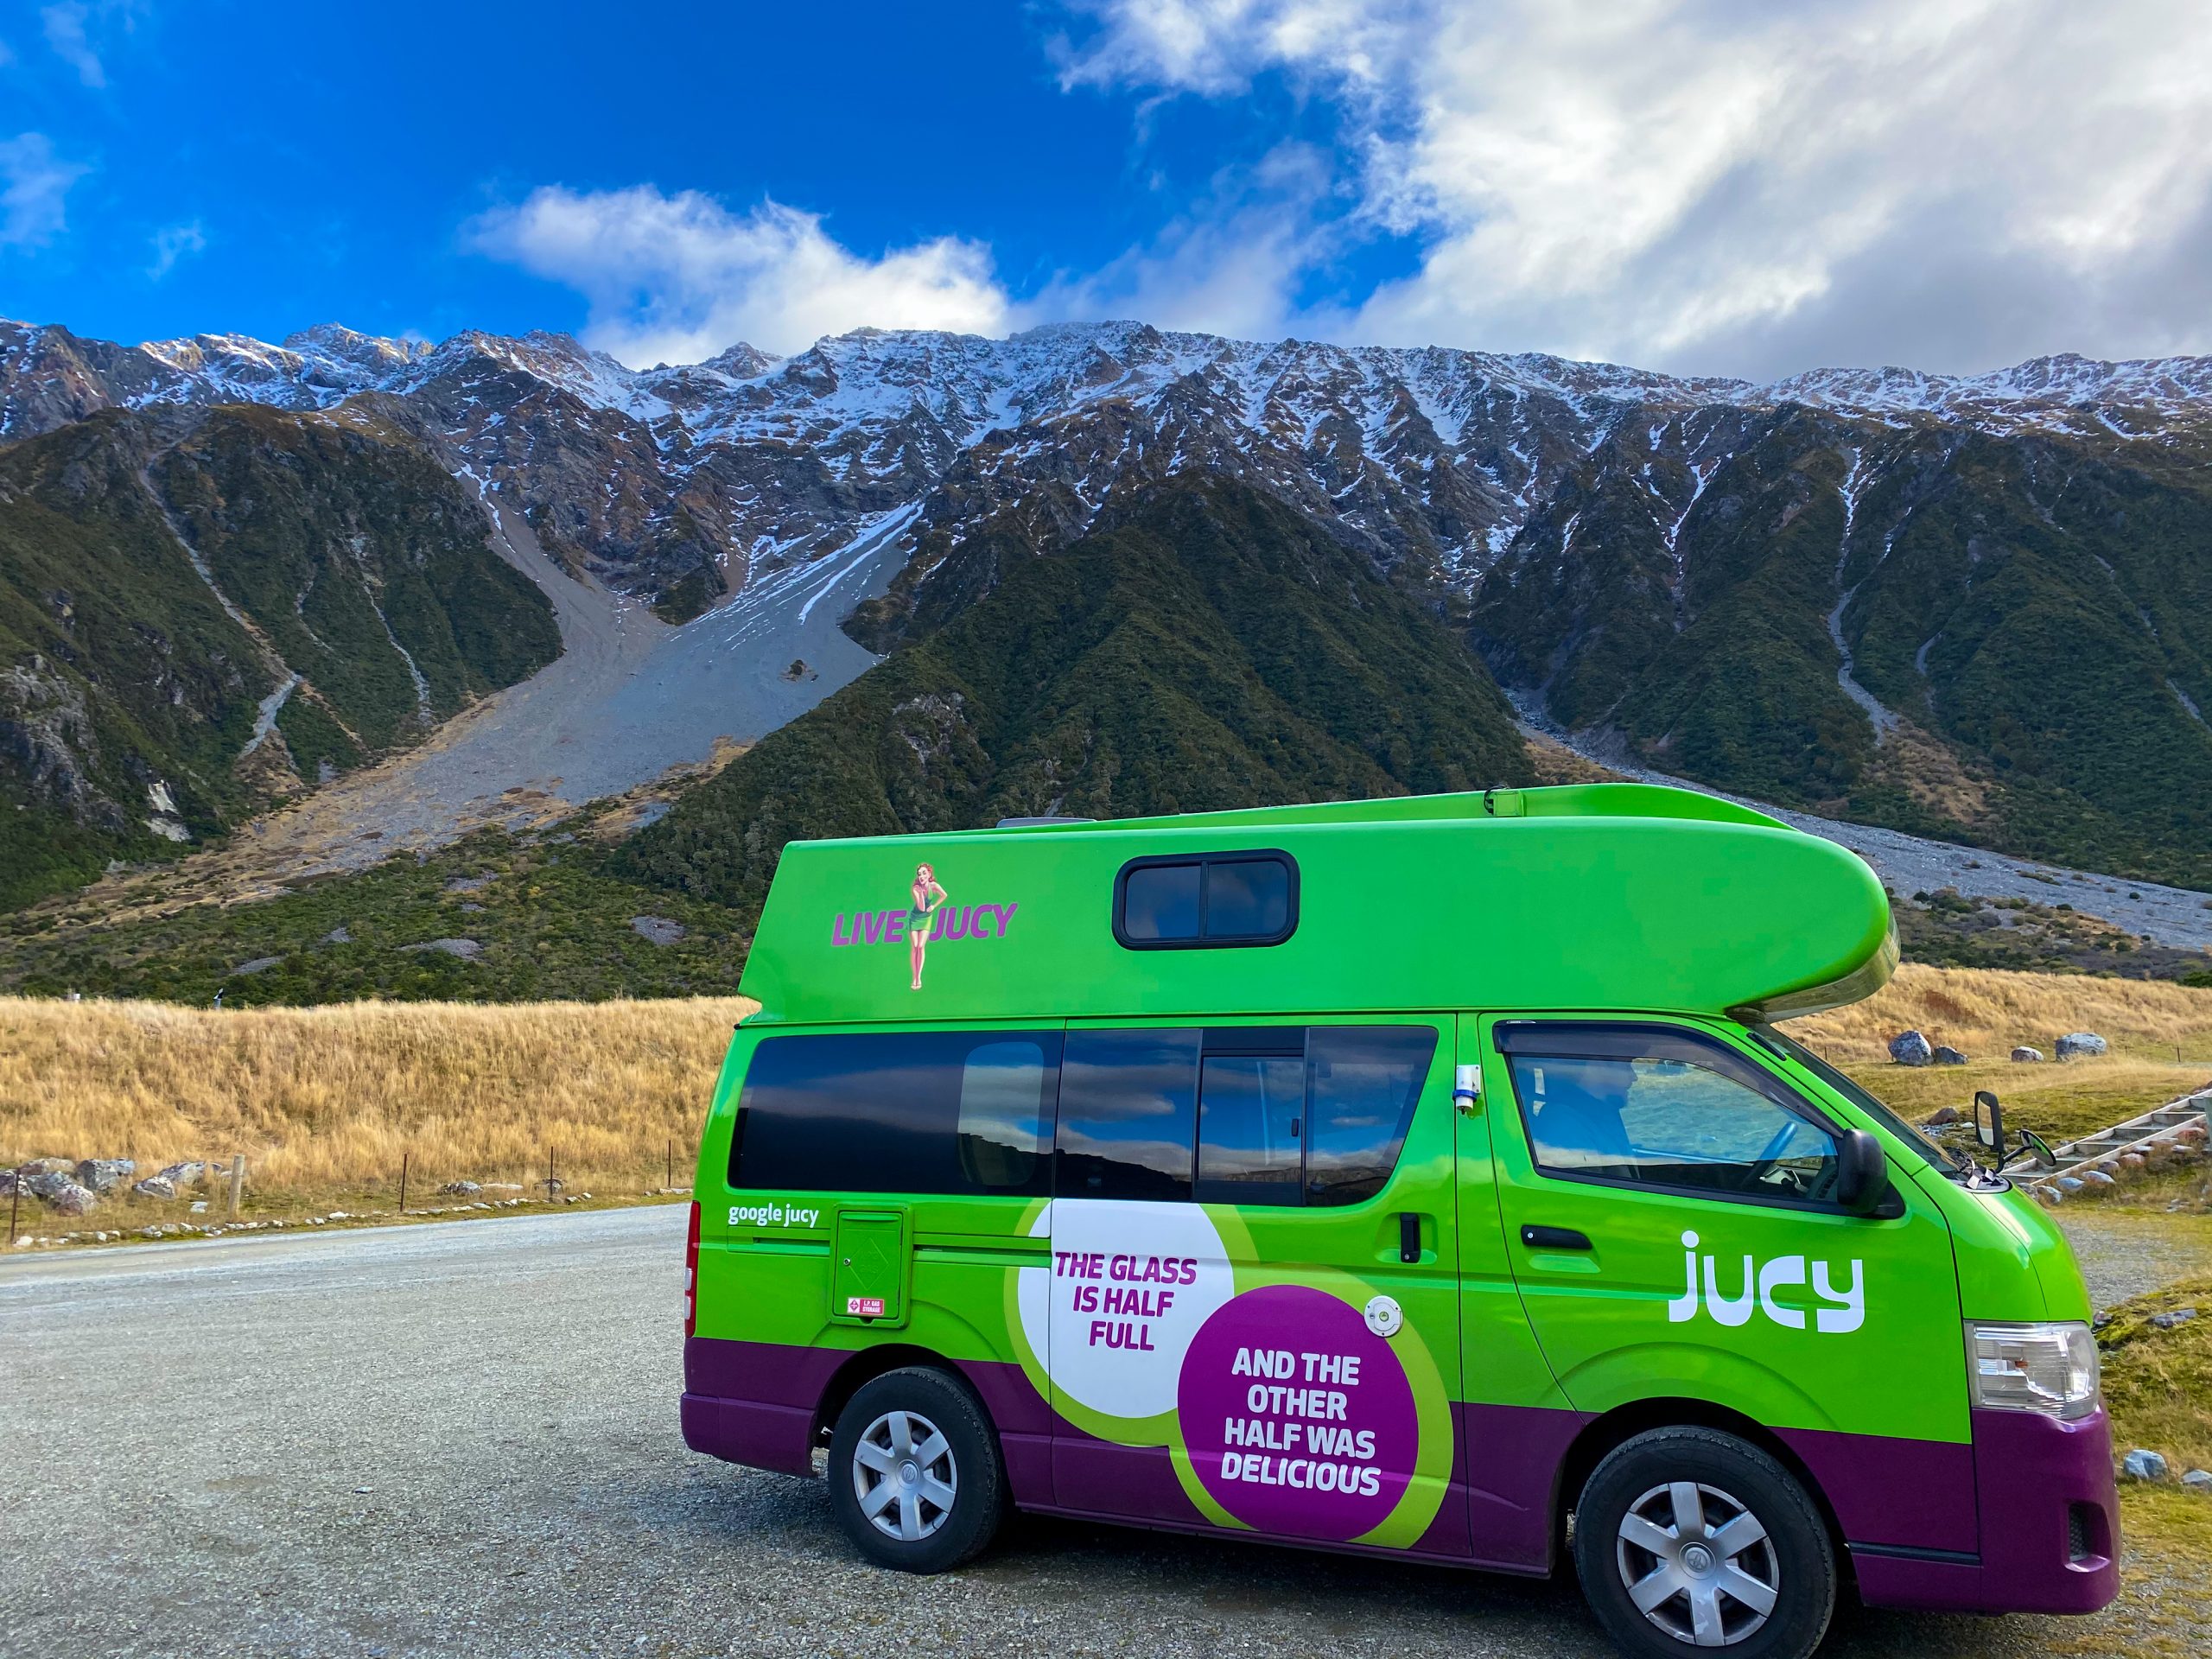 A green and purple campervan in a grassy camping spot overlooking snow-capped mountains.